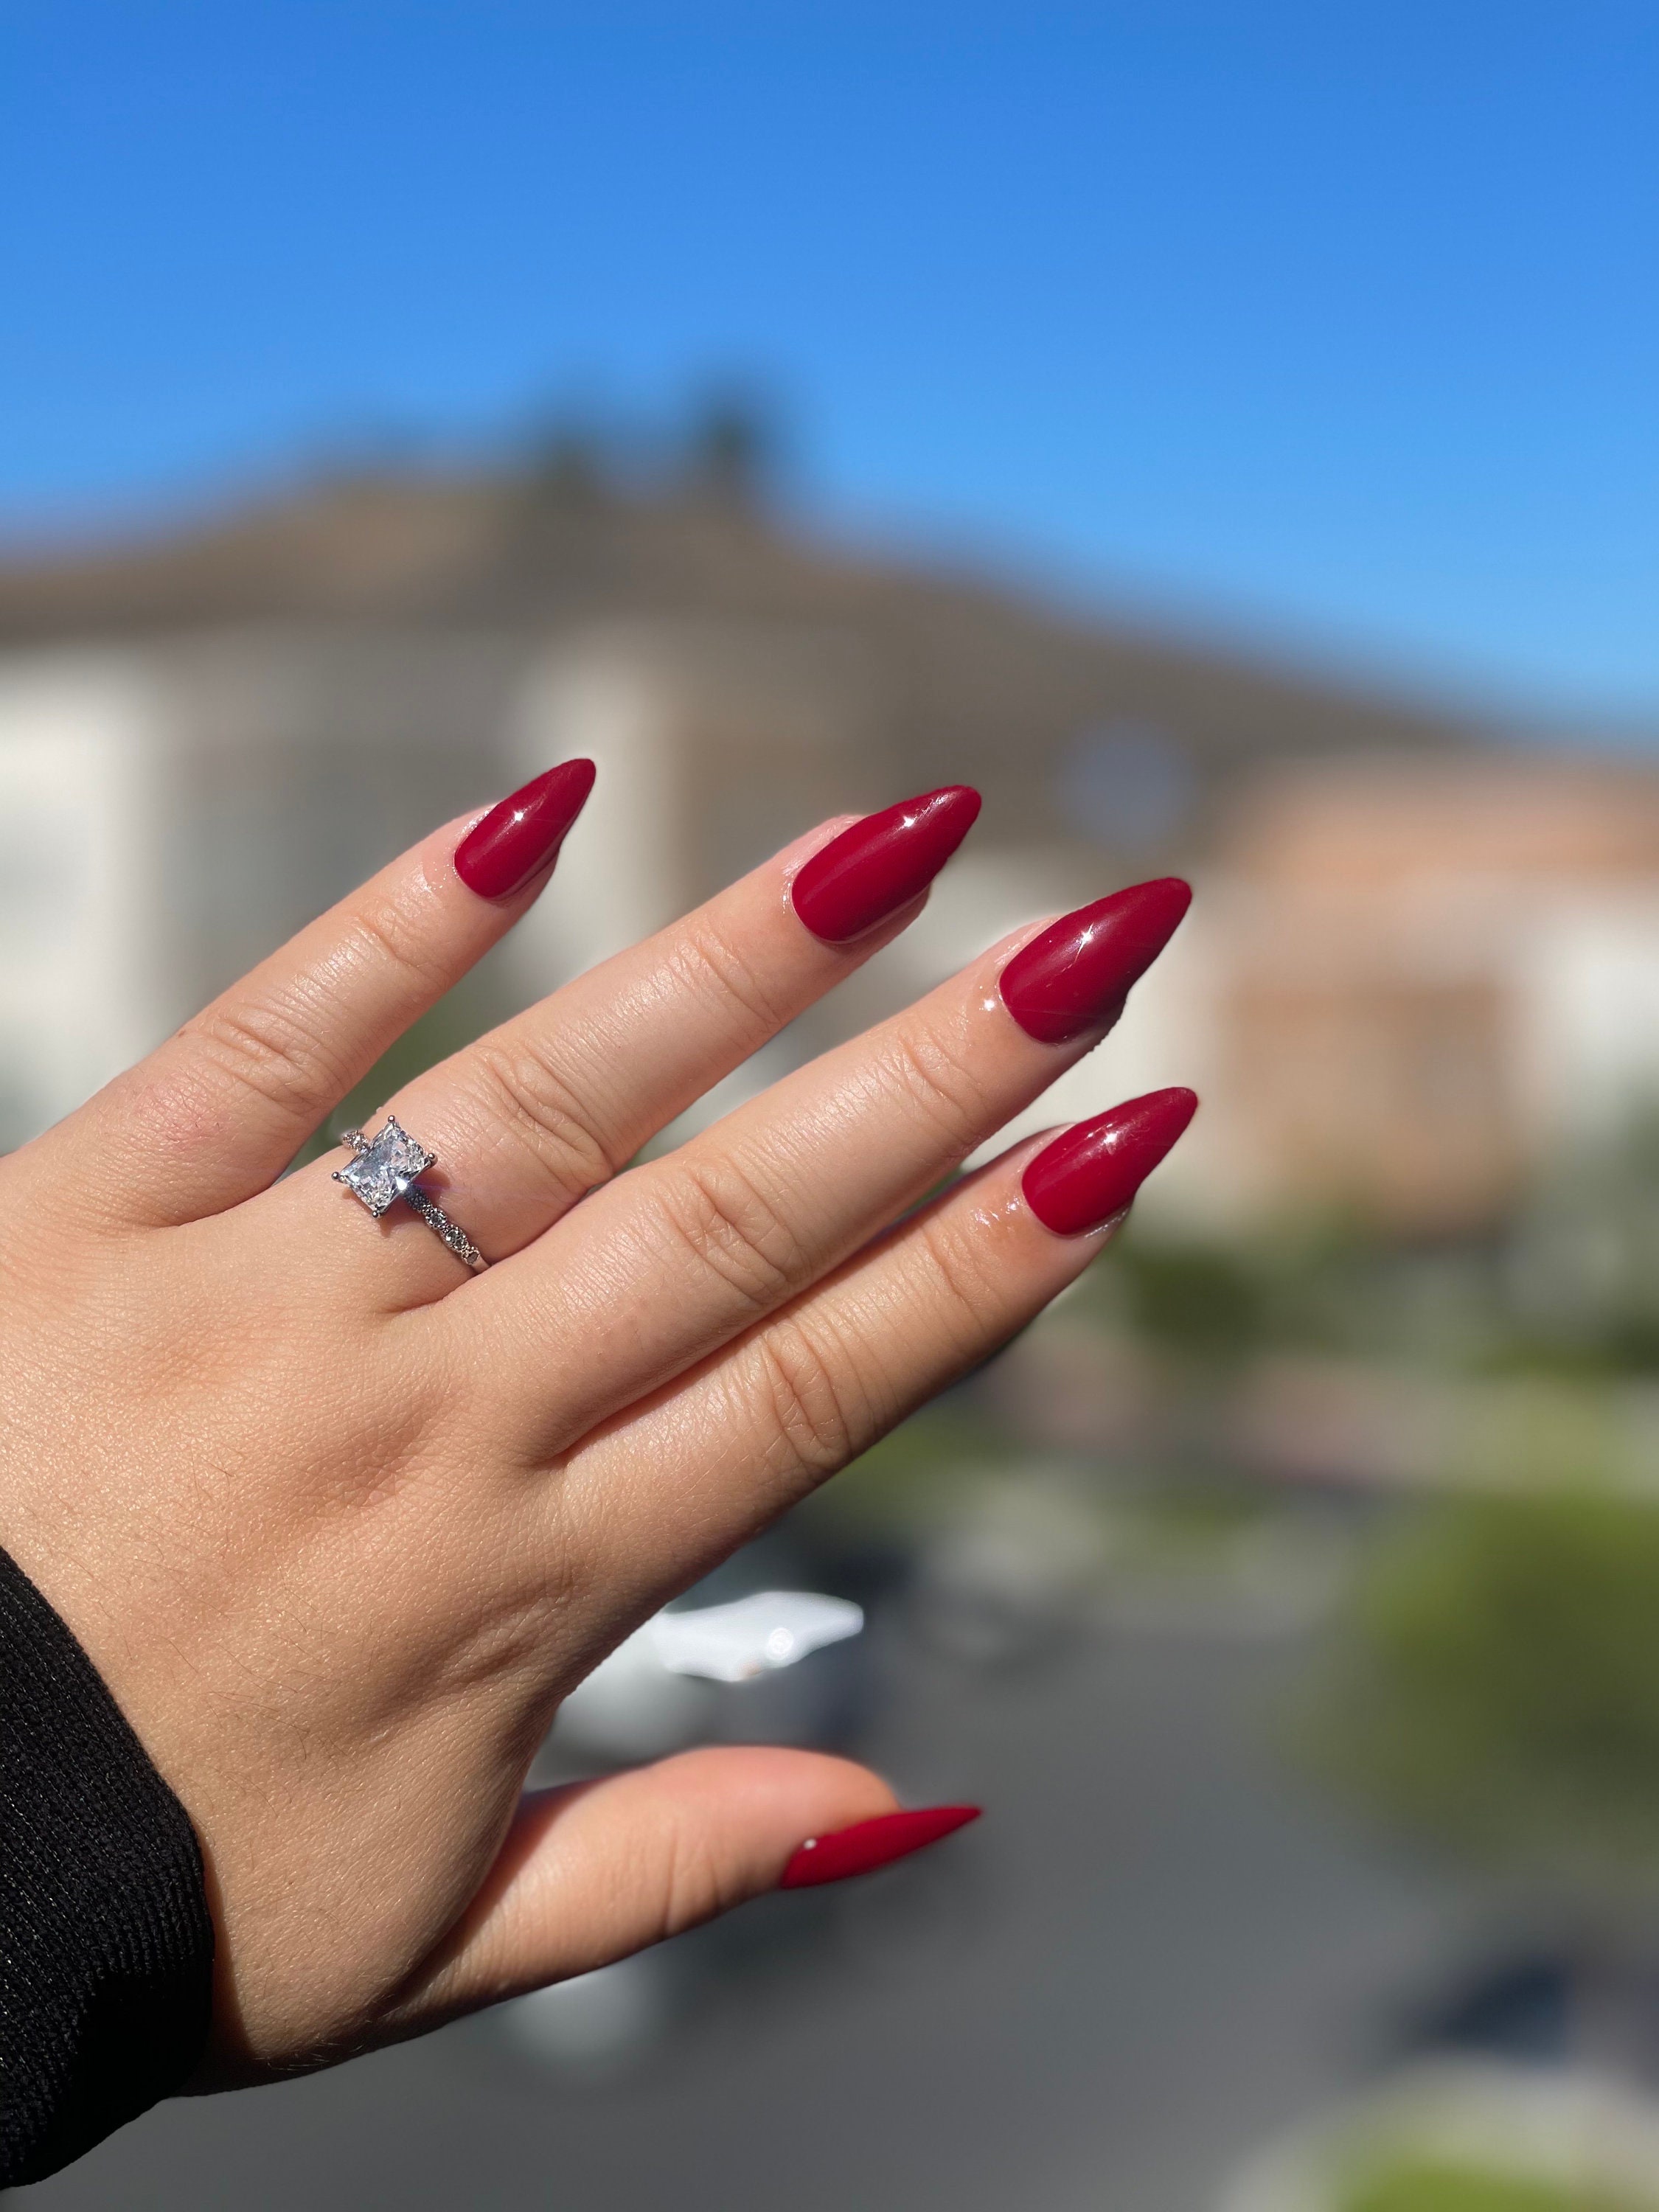 Nail Extension Poly Gel Options for V-day | Melissa Erial